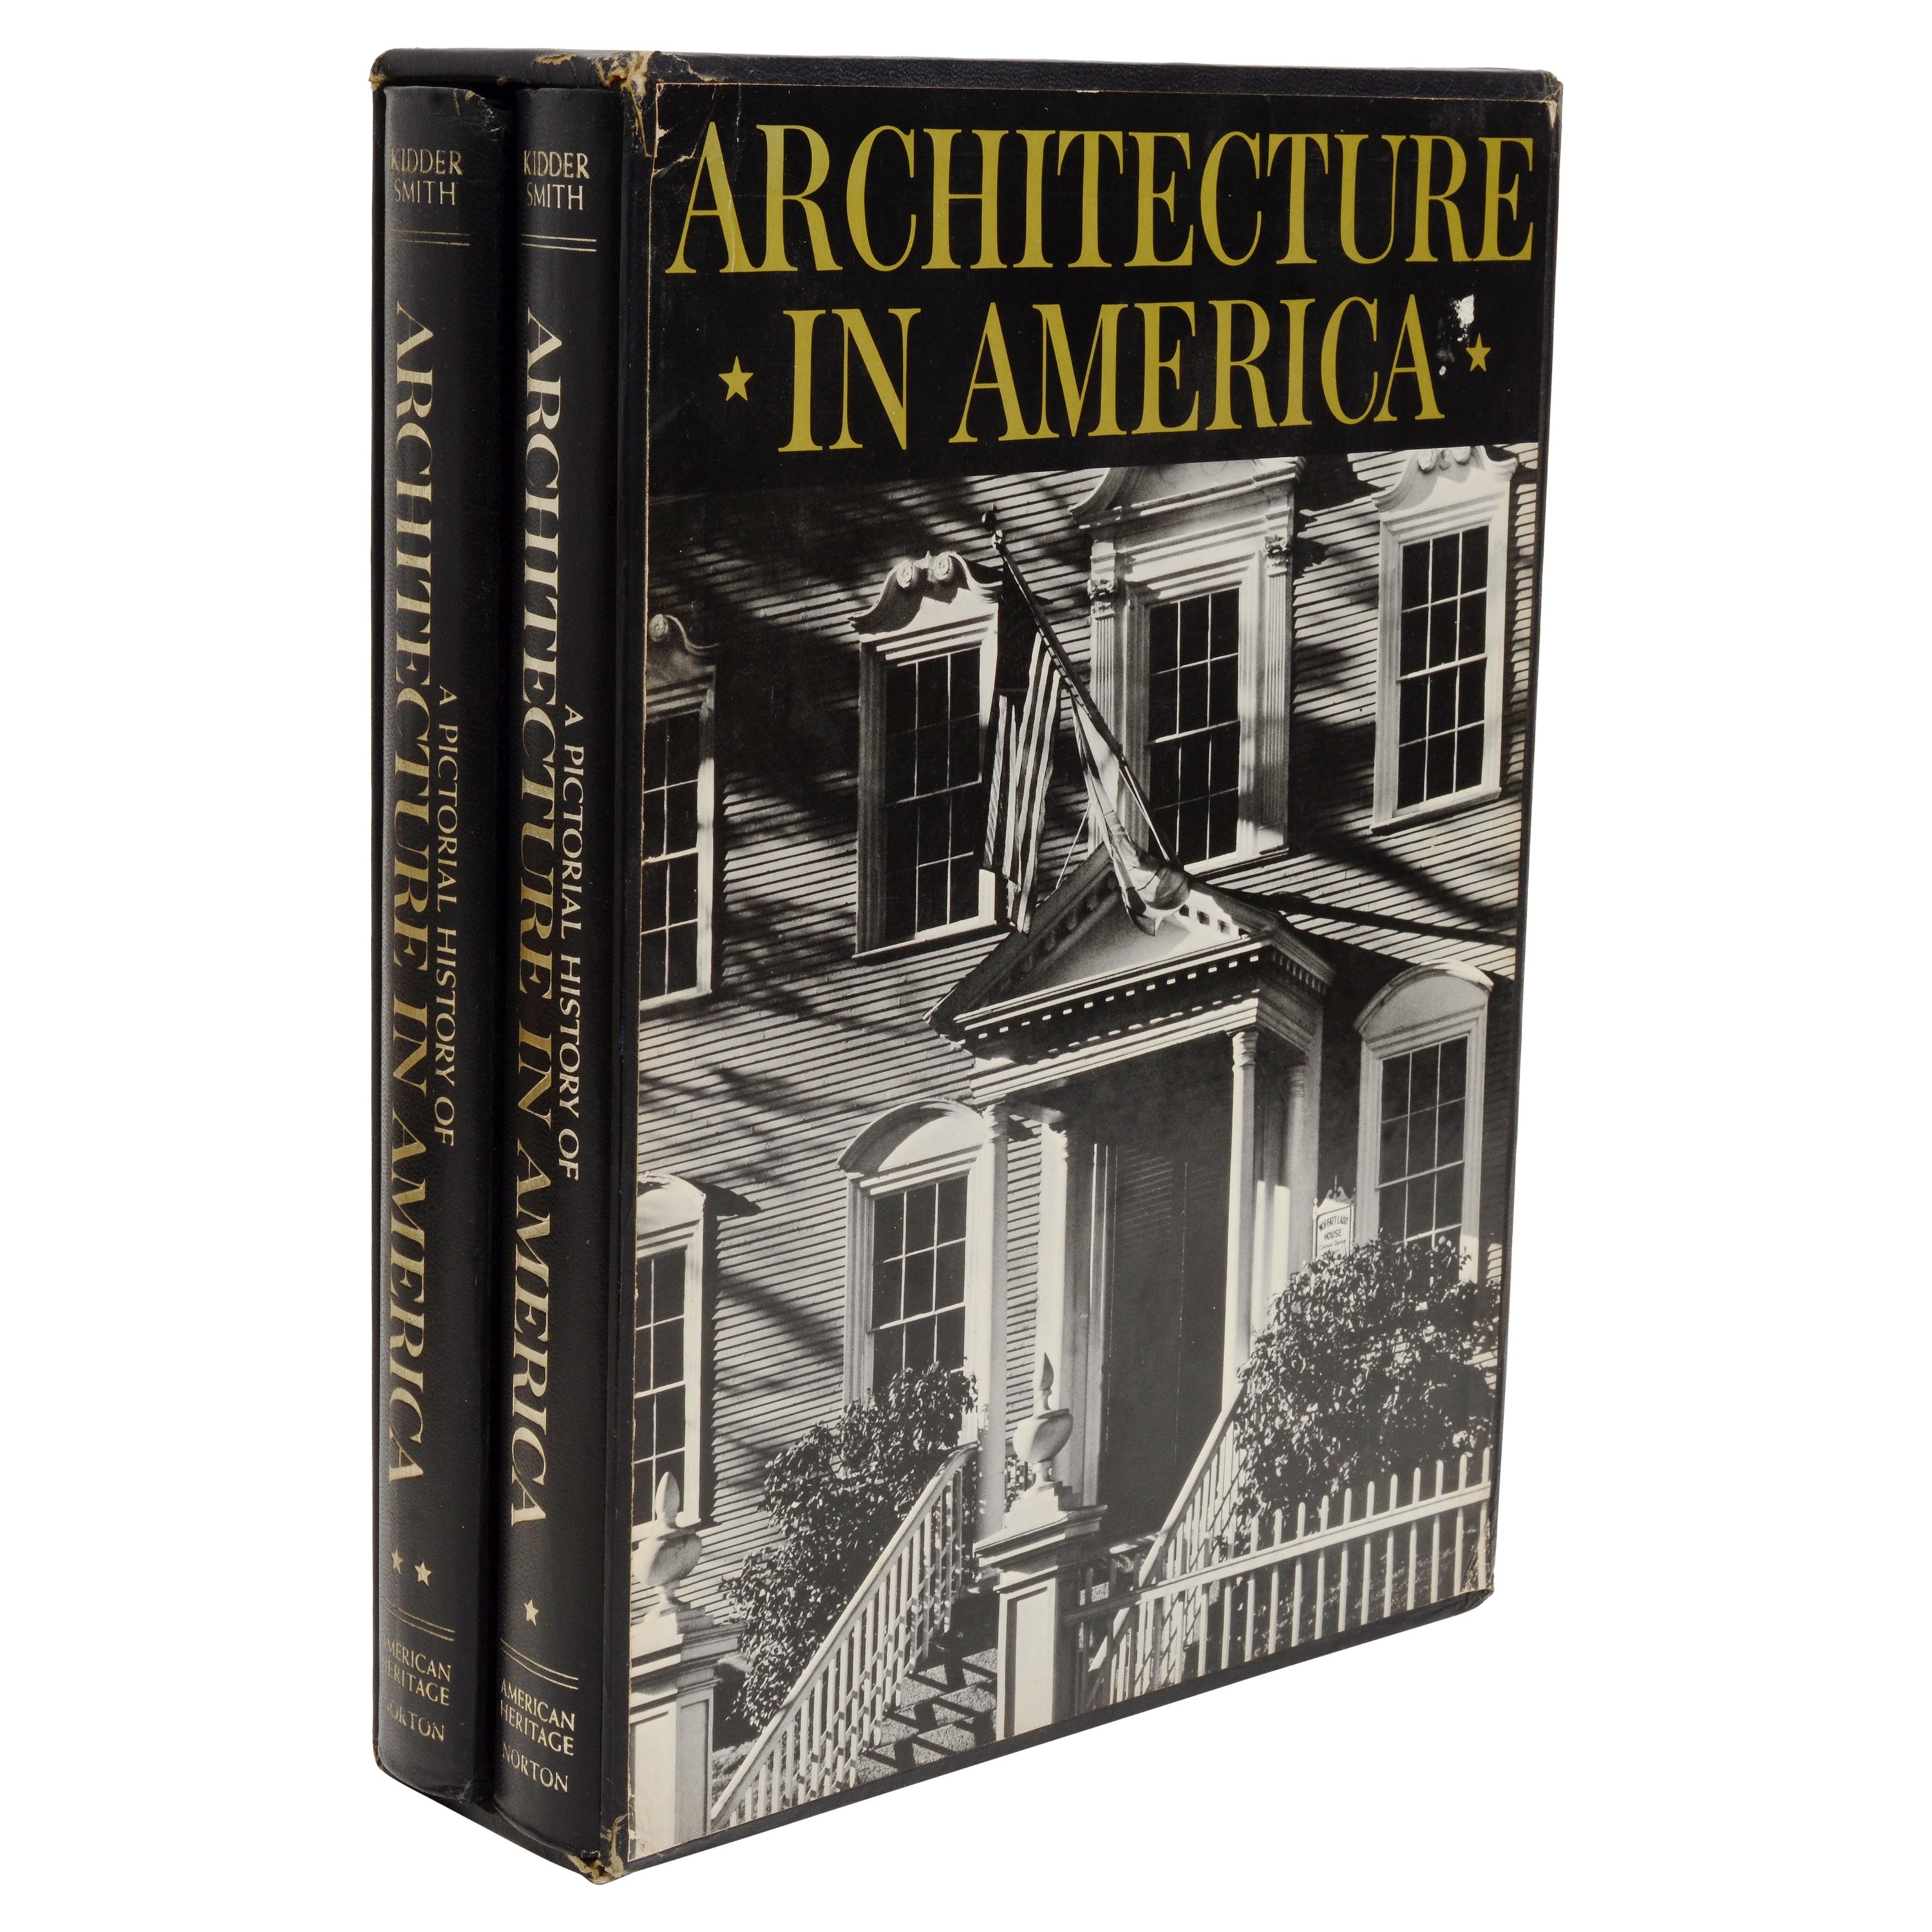 Pictorial History of Architecture in America by G. E. Kidder Smith, 1st Ed